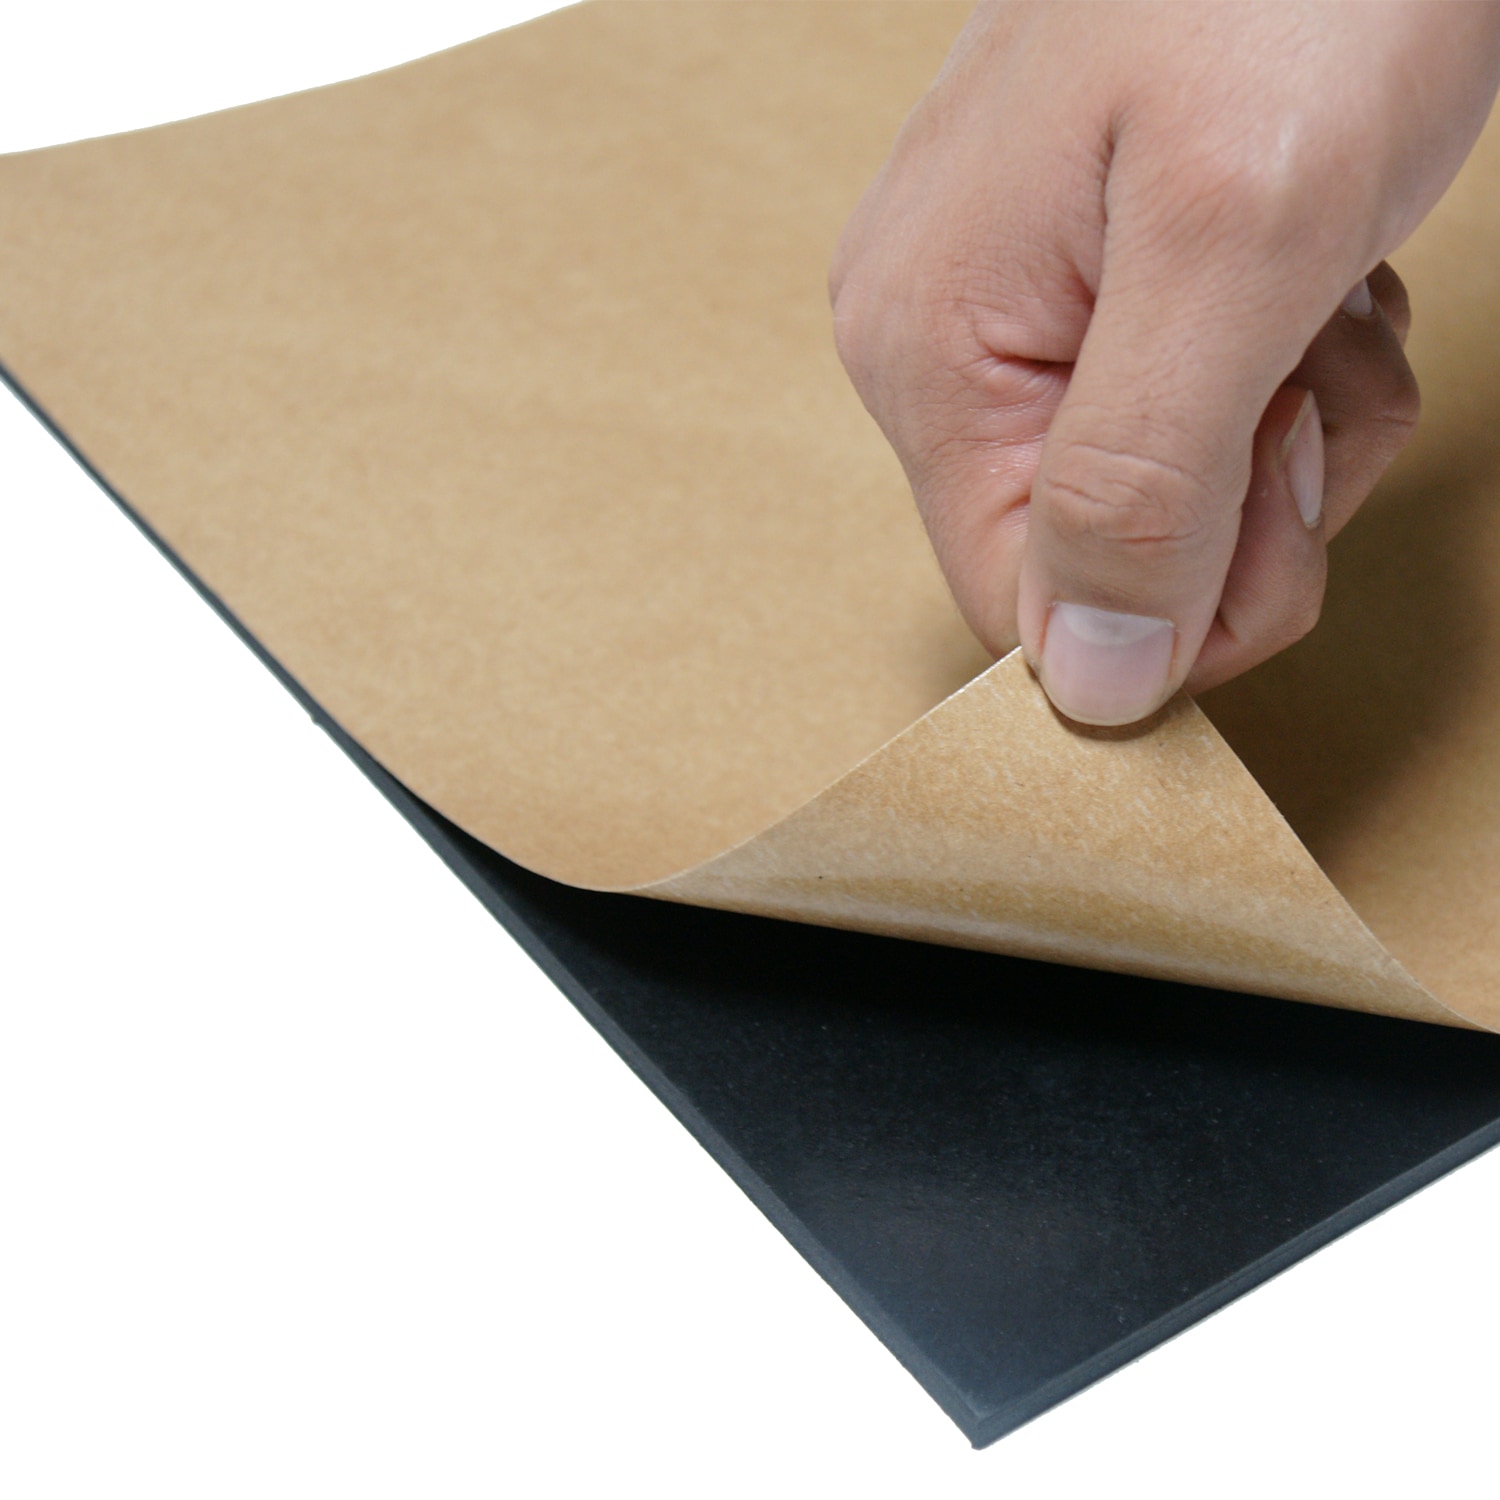 EPDM Rubber Self-Adhesive Replacement Pad - Avanti Systems Co. Ltd